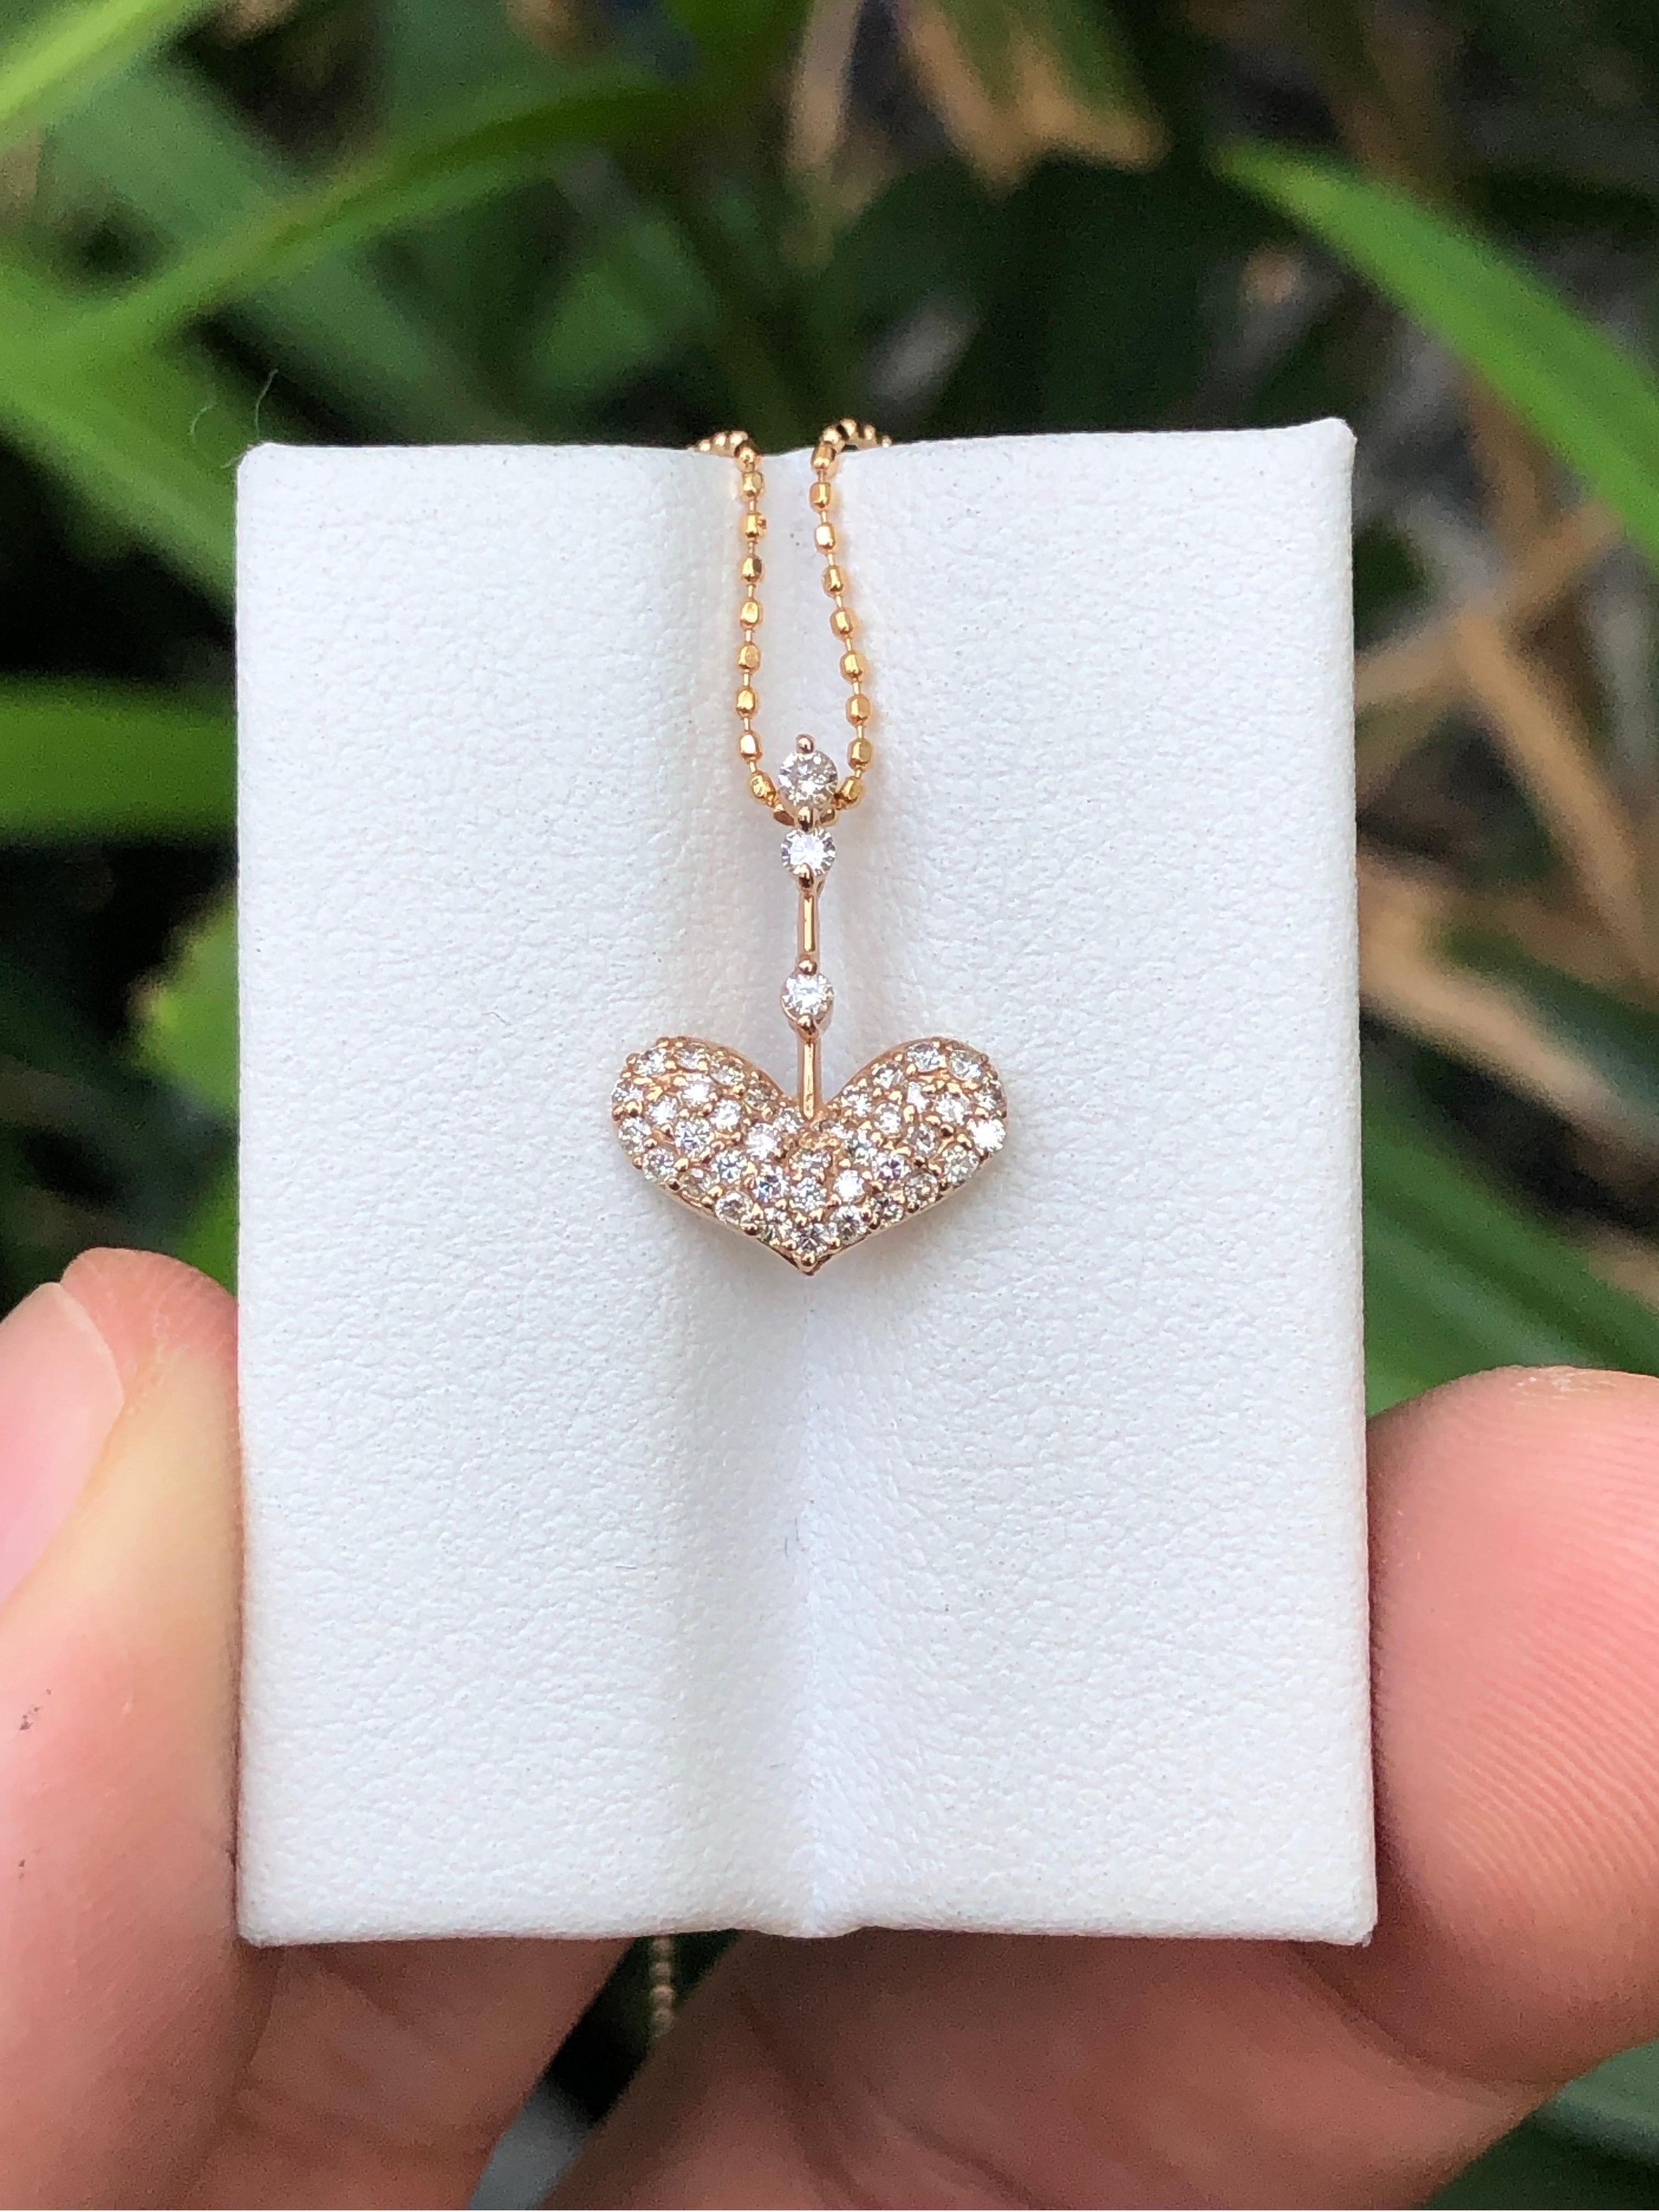 Introducing our exquisite Diamond-Gold Pendant/Necklace, featuring a stunning 13.5 carat diamond set in 18K gold weighing approximately 2.7 grams. With delicate craftsmanship tailored for the refined individual, this piece promises to elevate your